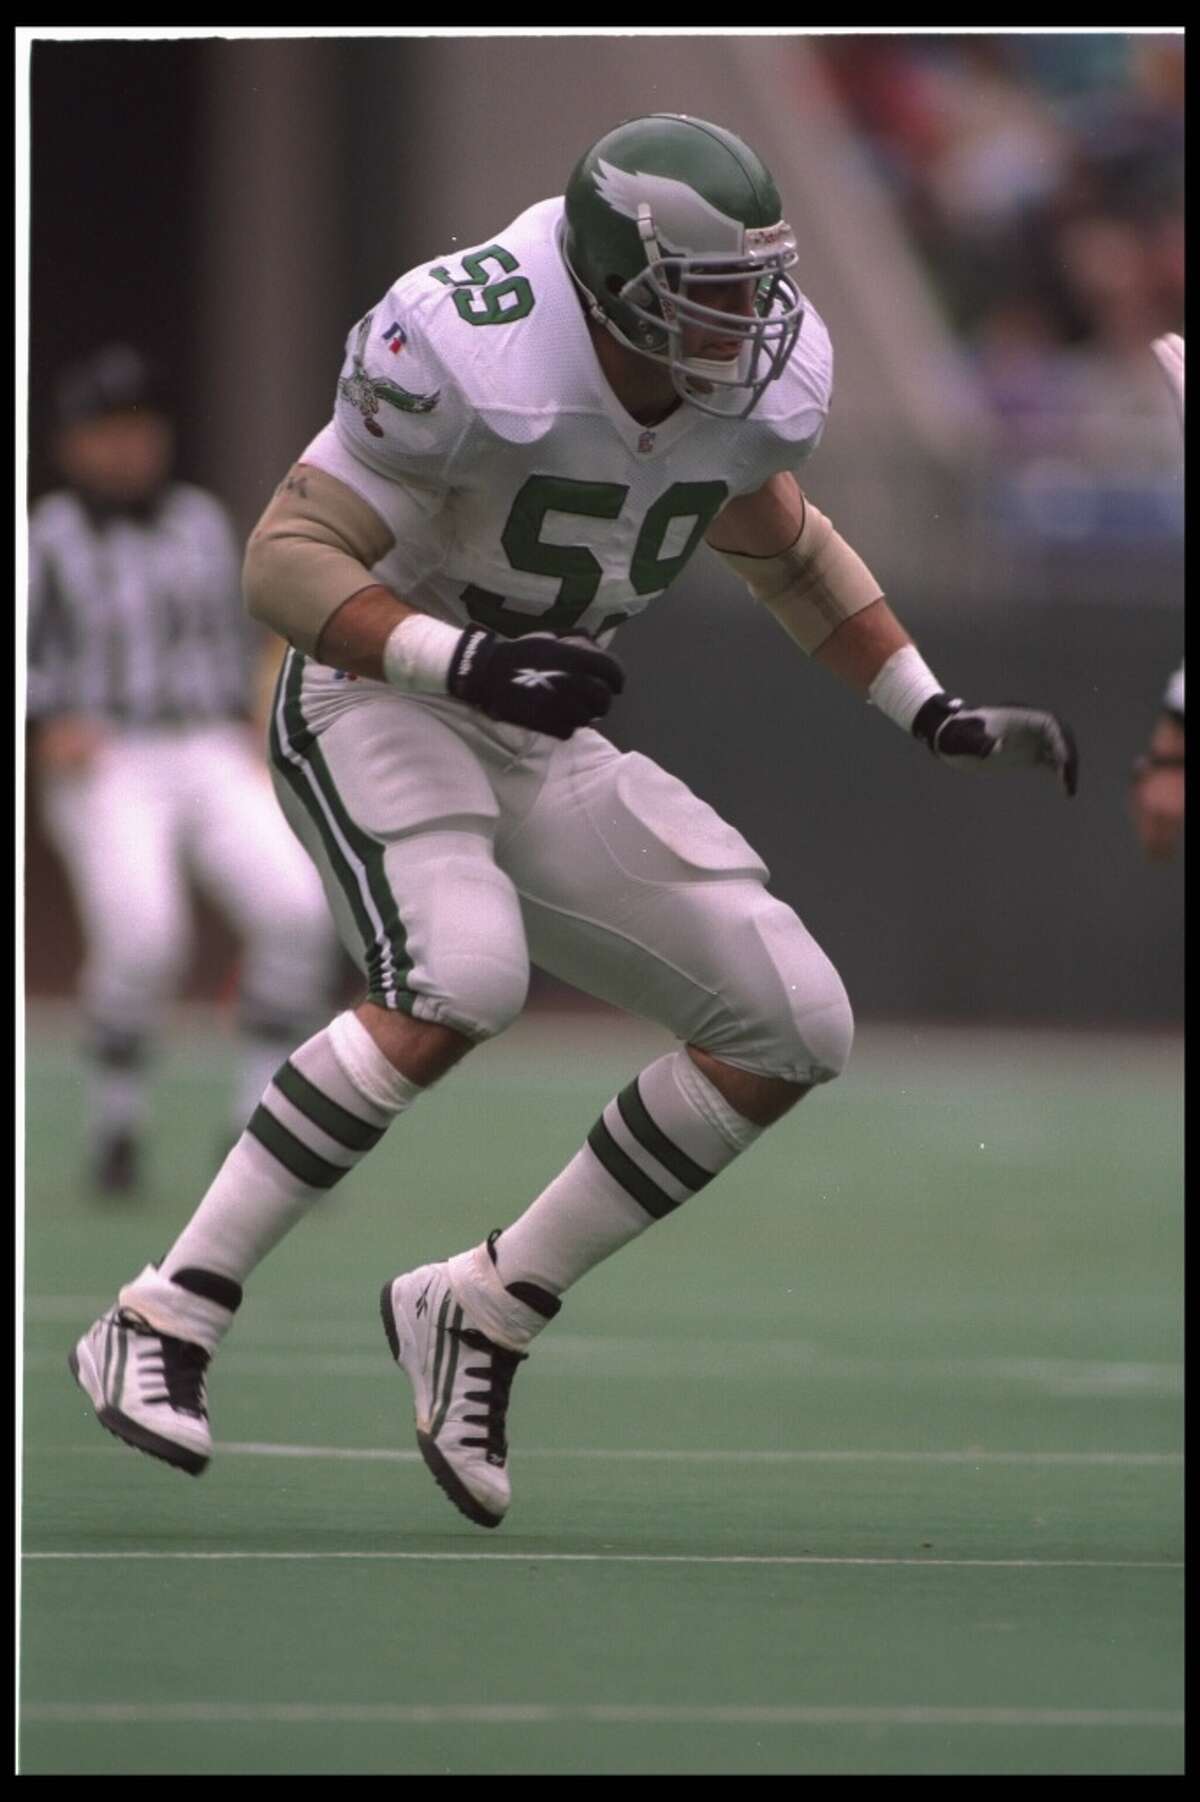 MIKE MAMULA, DE, EAGLES School: Boston College Drafted: 7th overall in 1995 Combine showing: At 6-4, 258 pounds, Mamula ran a 4.58 40-yard dash, recorded a 38.5 inch vertical, a 10 foot 5 inch broad jump, 28 reps of 225 pounds and scored a near-perfect 49 out of 50 on the Wonderlic. NFL career: Five years in the NFL with the Eagles, 64 starts, 31.5 sacks, 8 forced fumbles and 6 fumble recoveries.